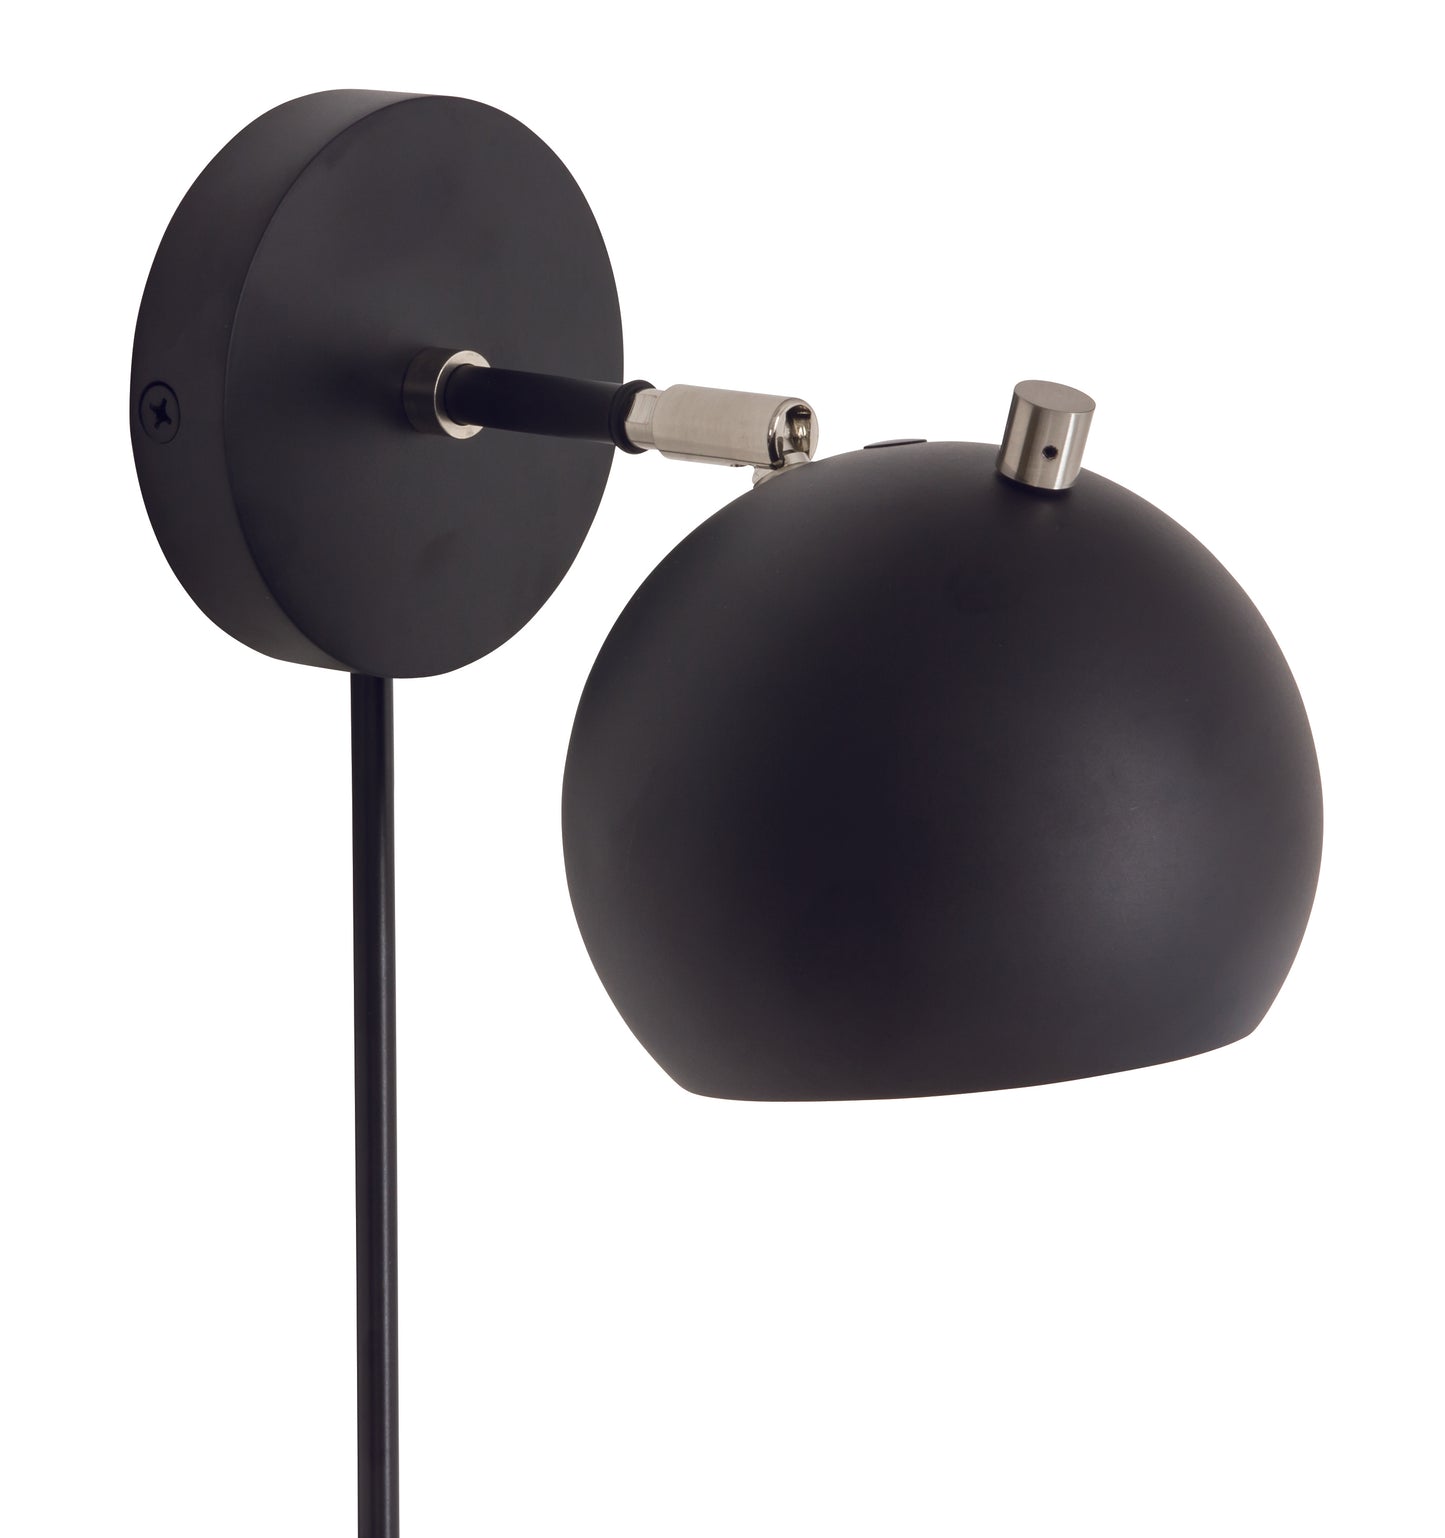 House of Troy Orwell LED Wall Lamp in Black with Satin Nickel Accents OR775-BLKSN